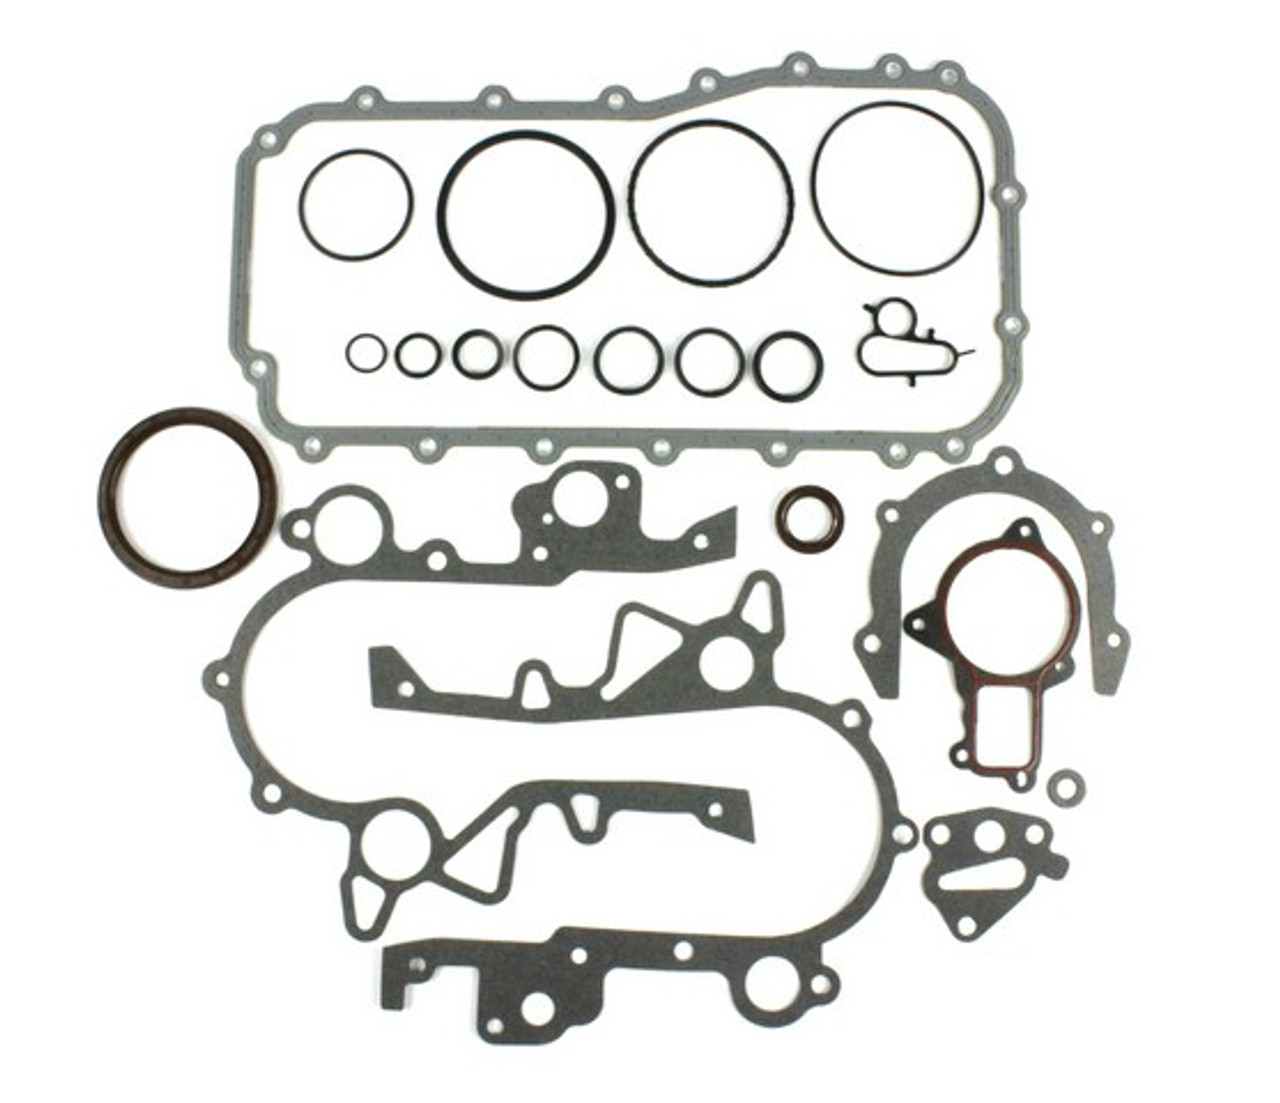 Lower Gasket Set 3.3L 1994 Chrysler Town & Country - LGS1135.35